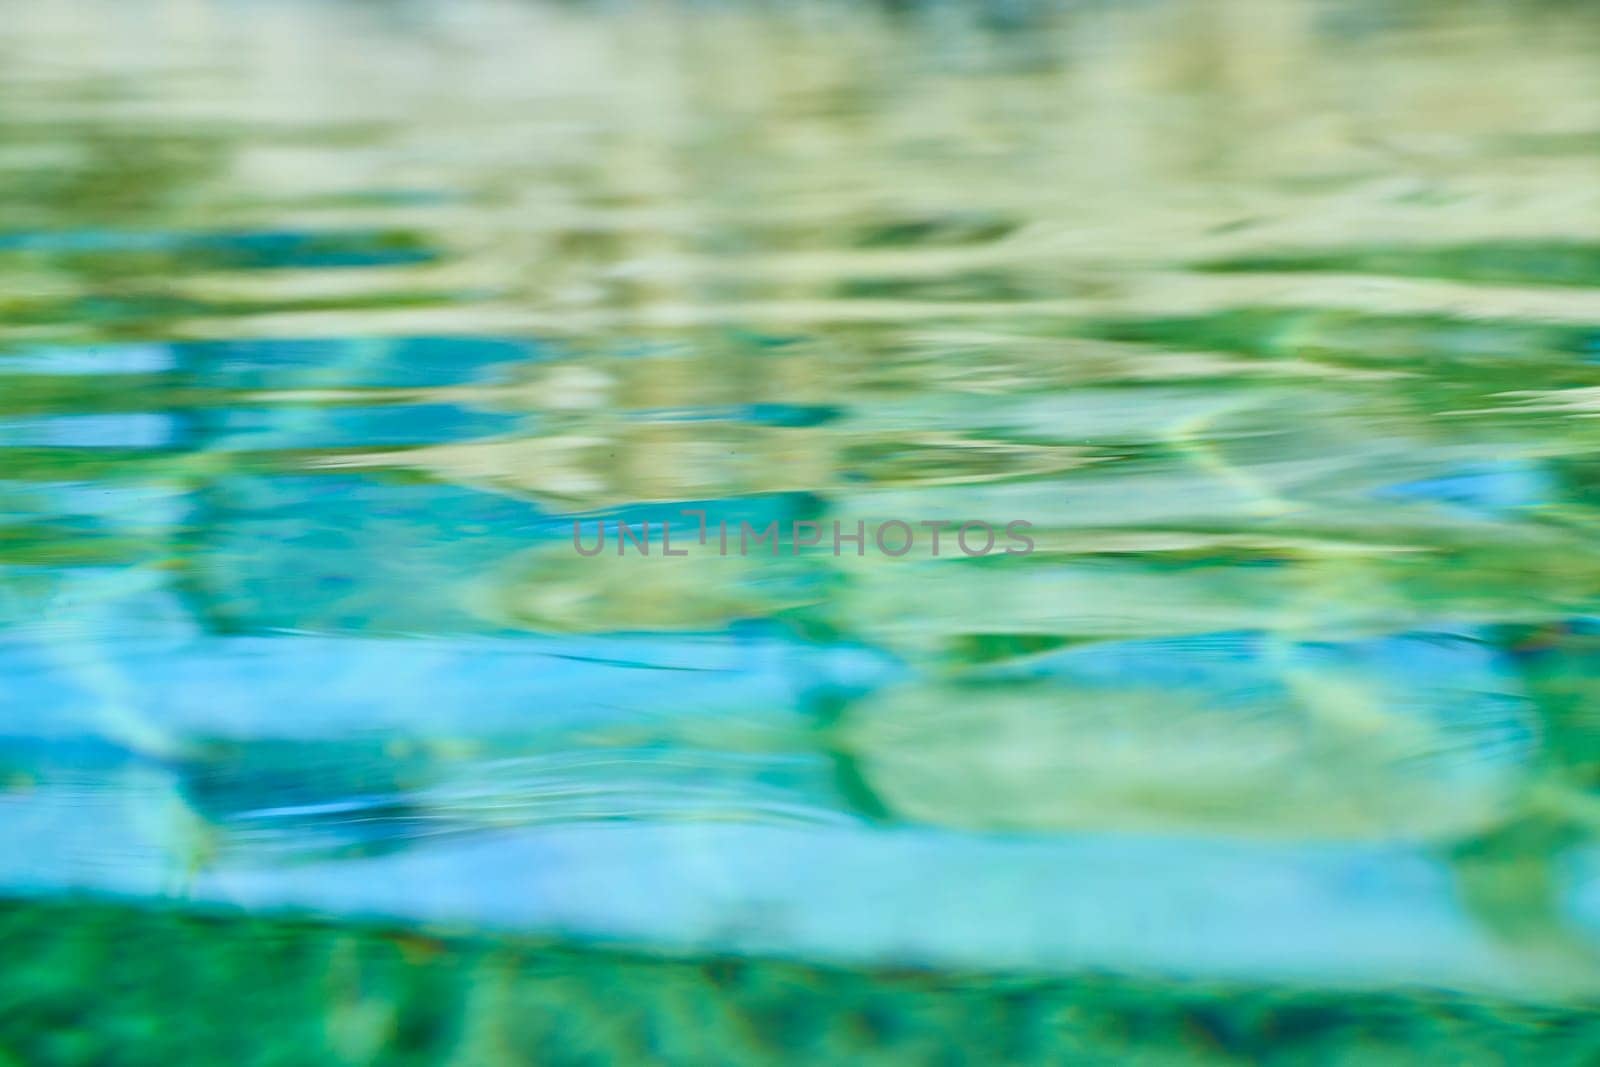 Abstract water texture in vibrant blues and greens, evoking serenity and nature's beauty. Ideal for wellness and art themes.